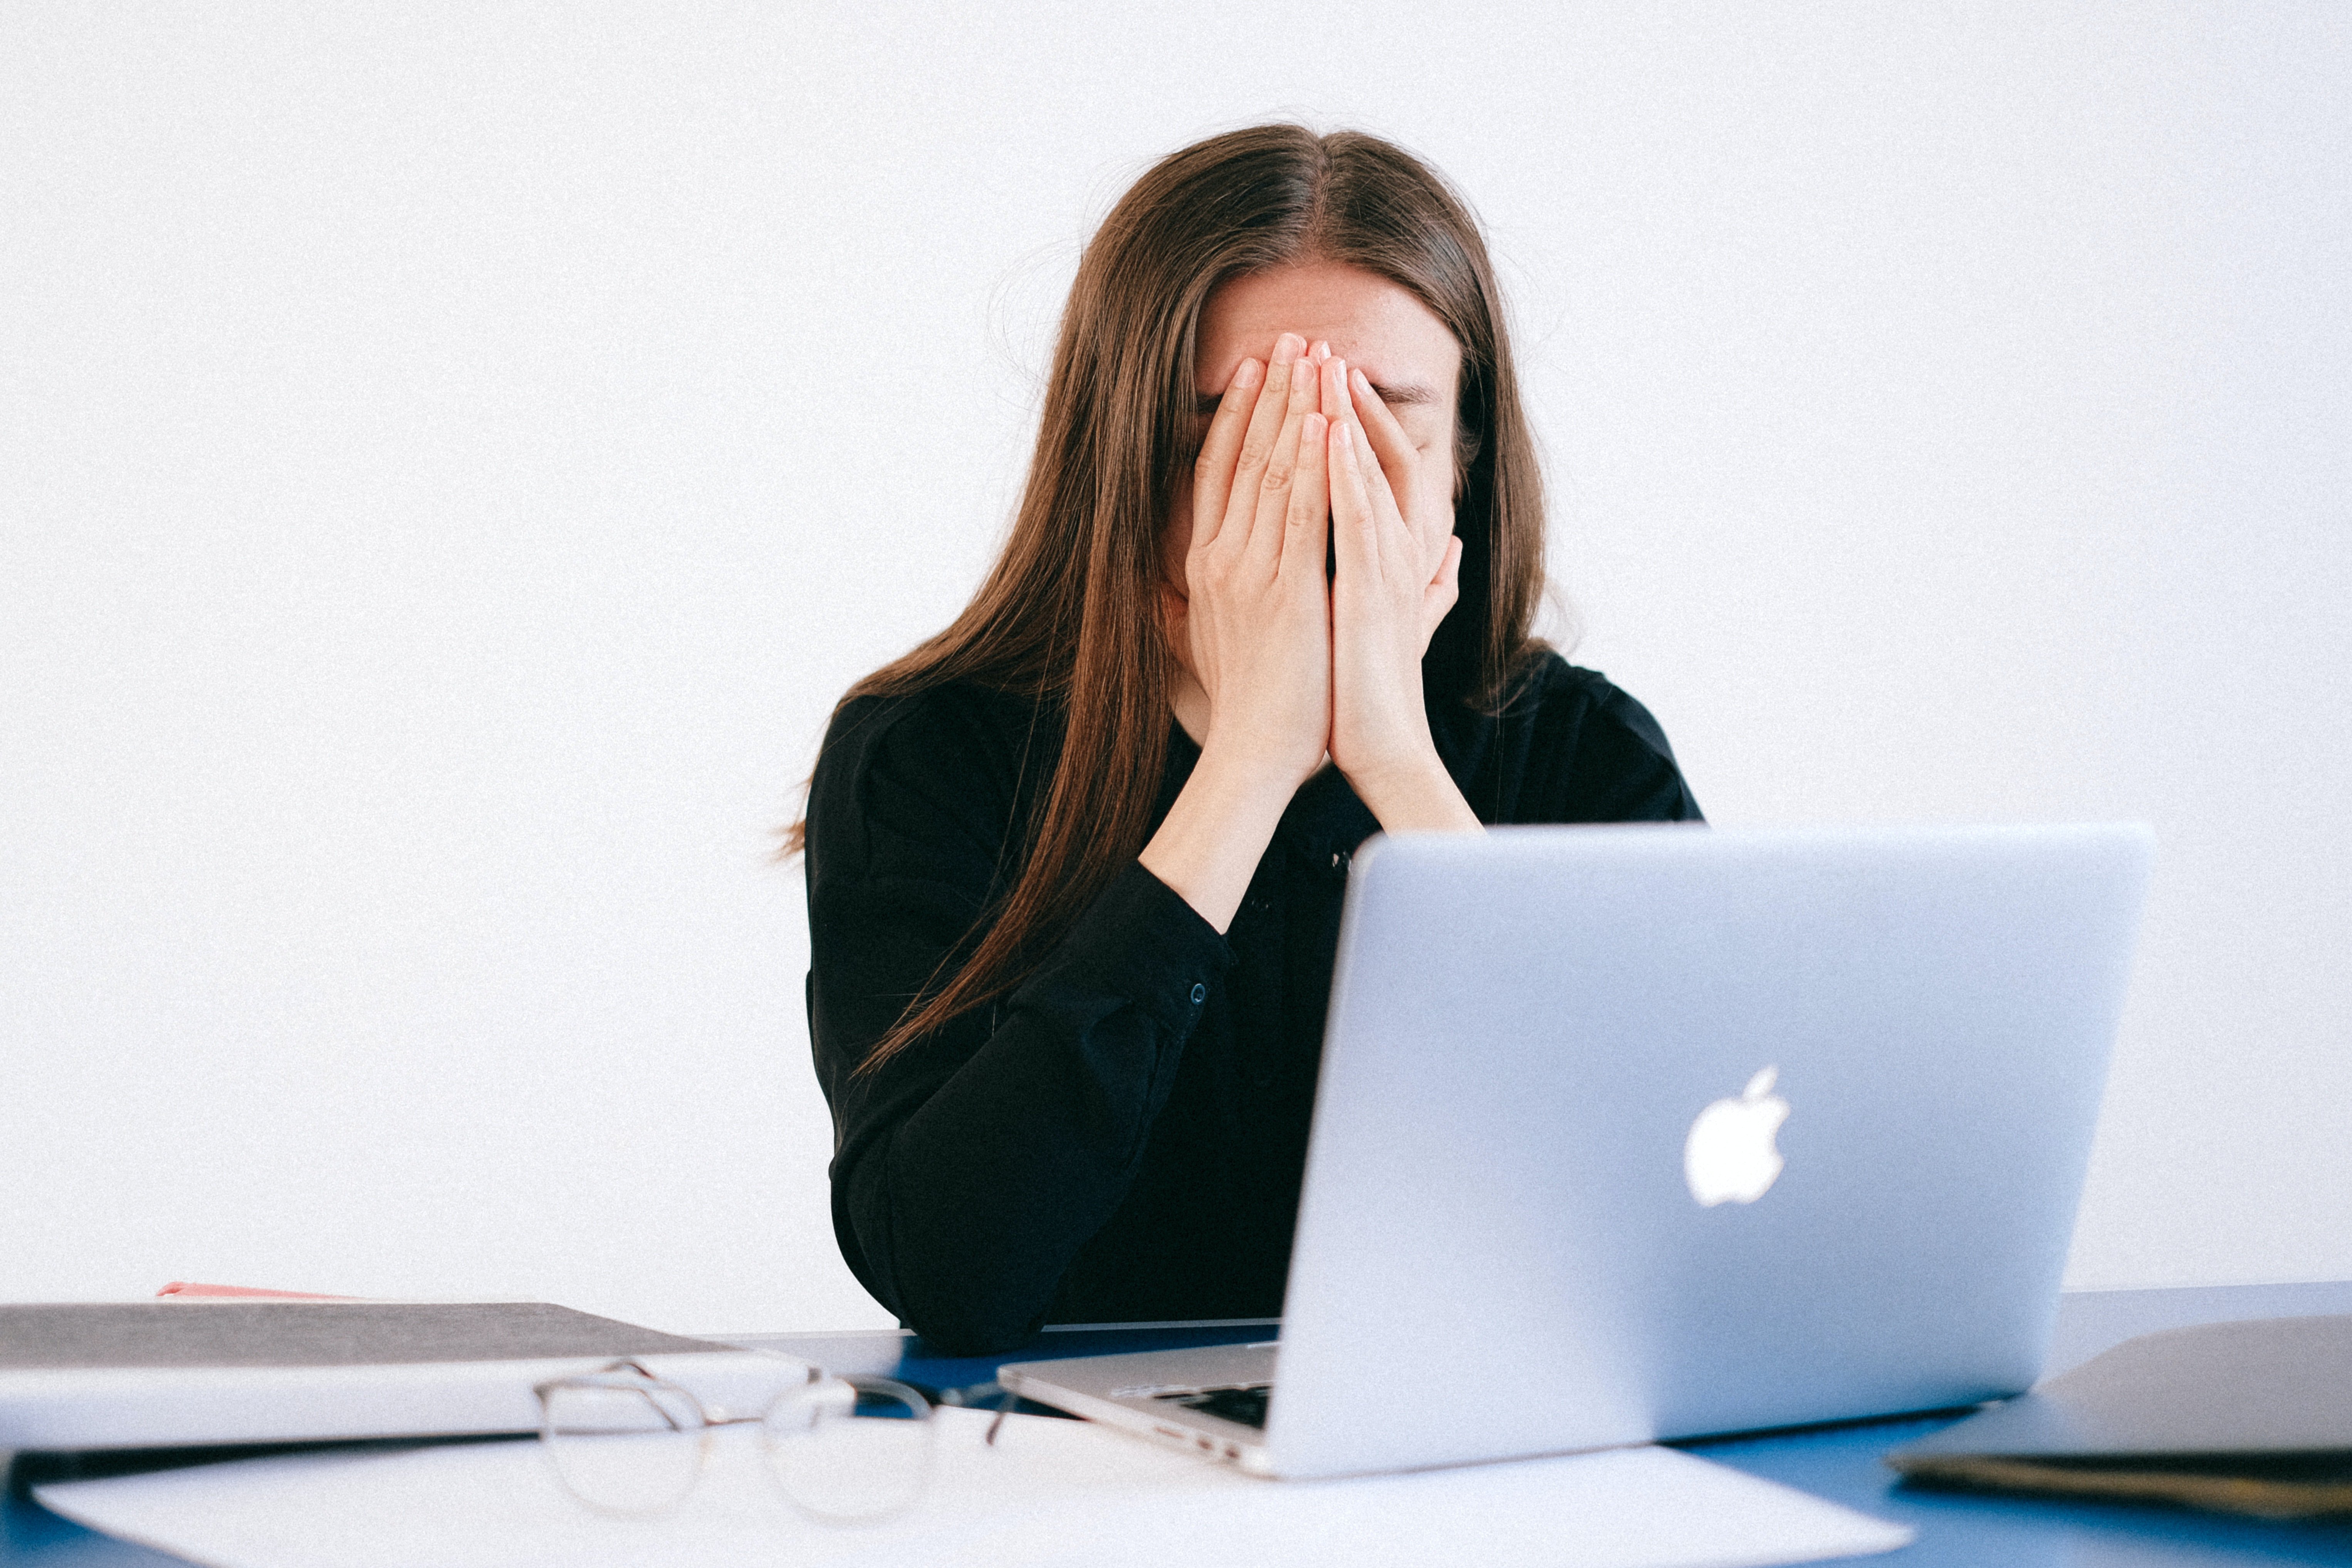 Depressed woman hiding her face | Photo: Pexels